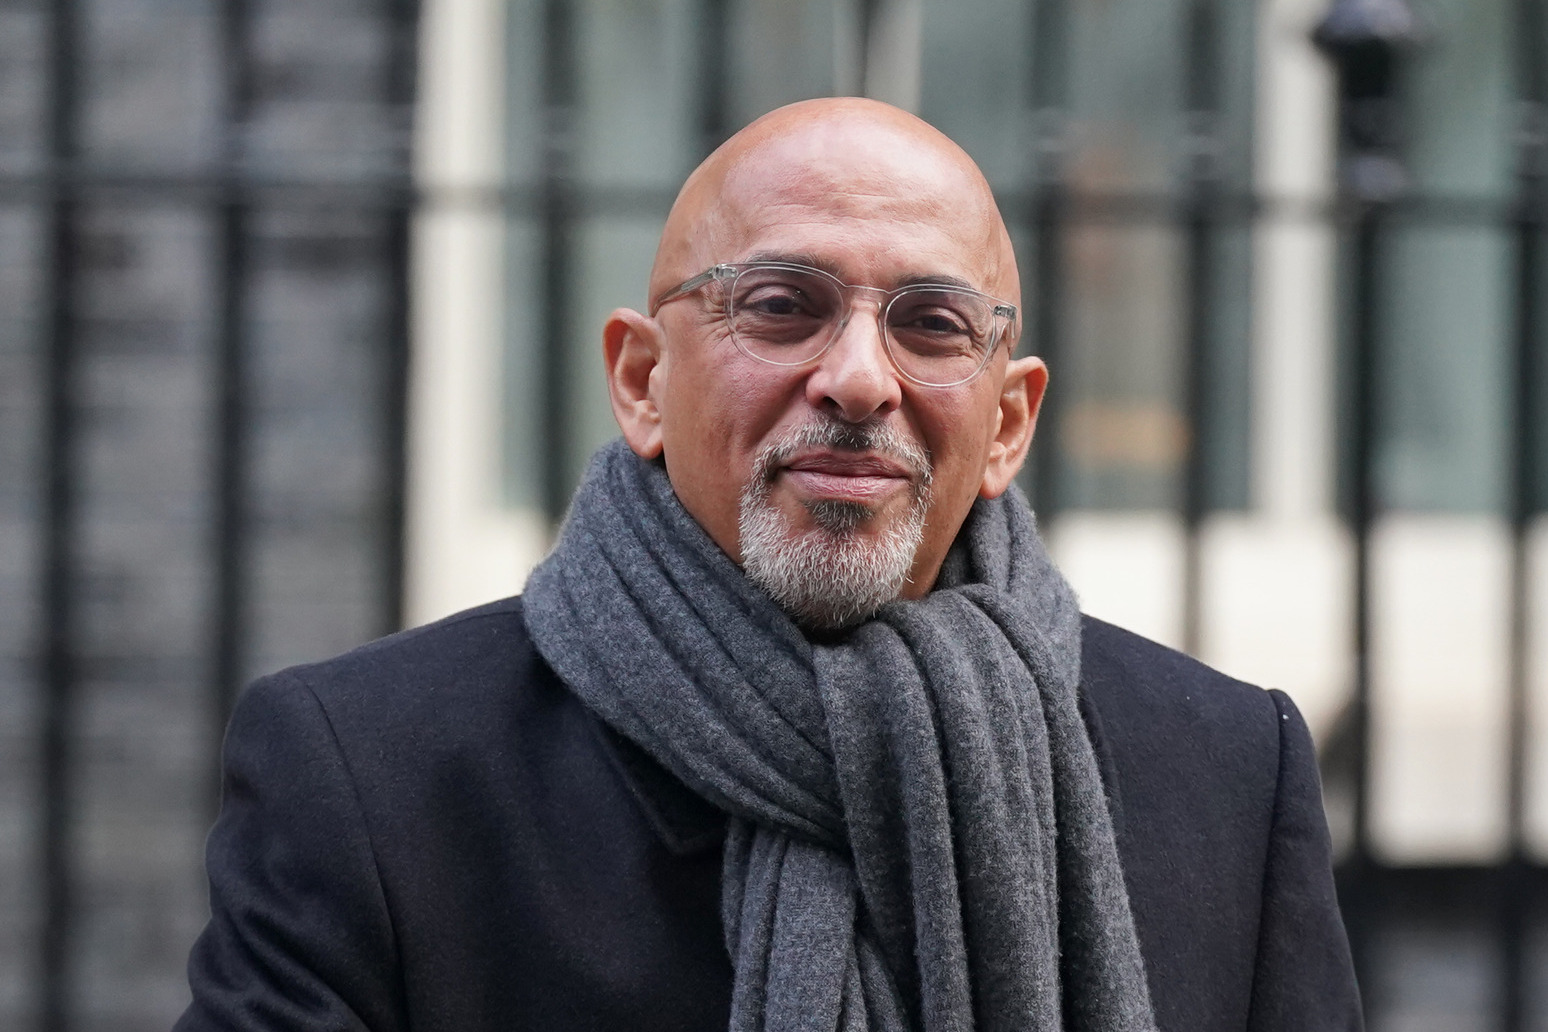 Labour demands answers from HMRC over Zahawi tax dispute claims 